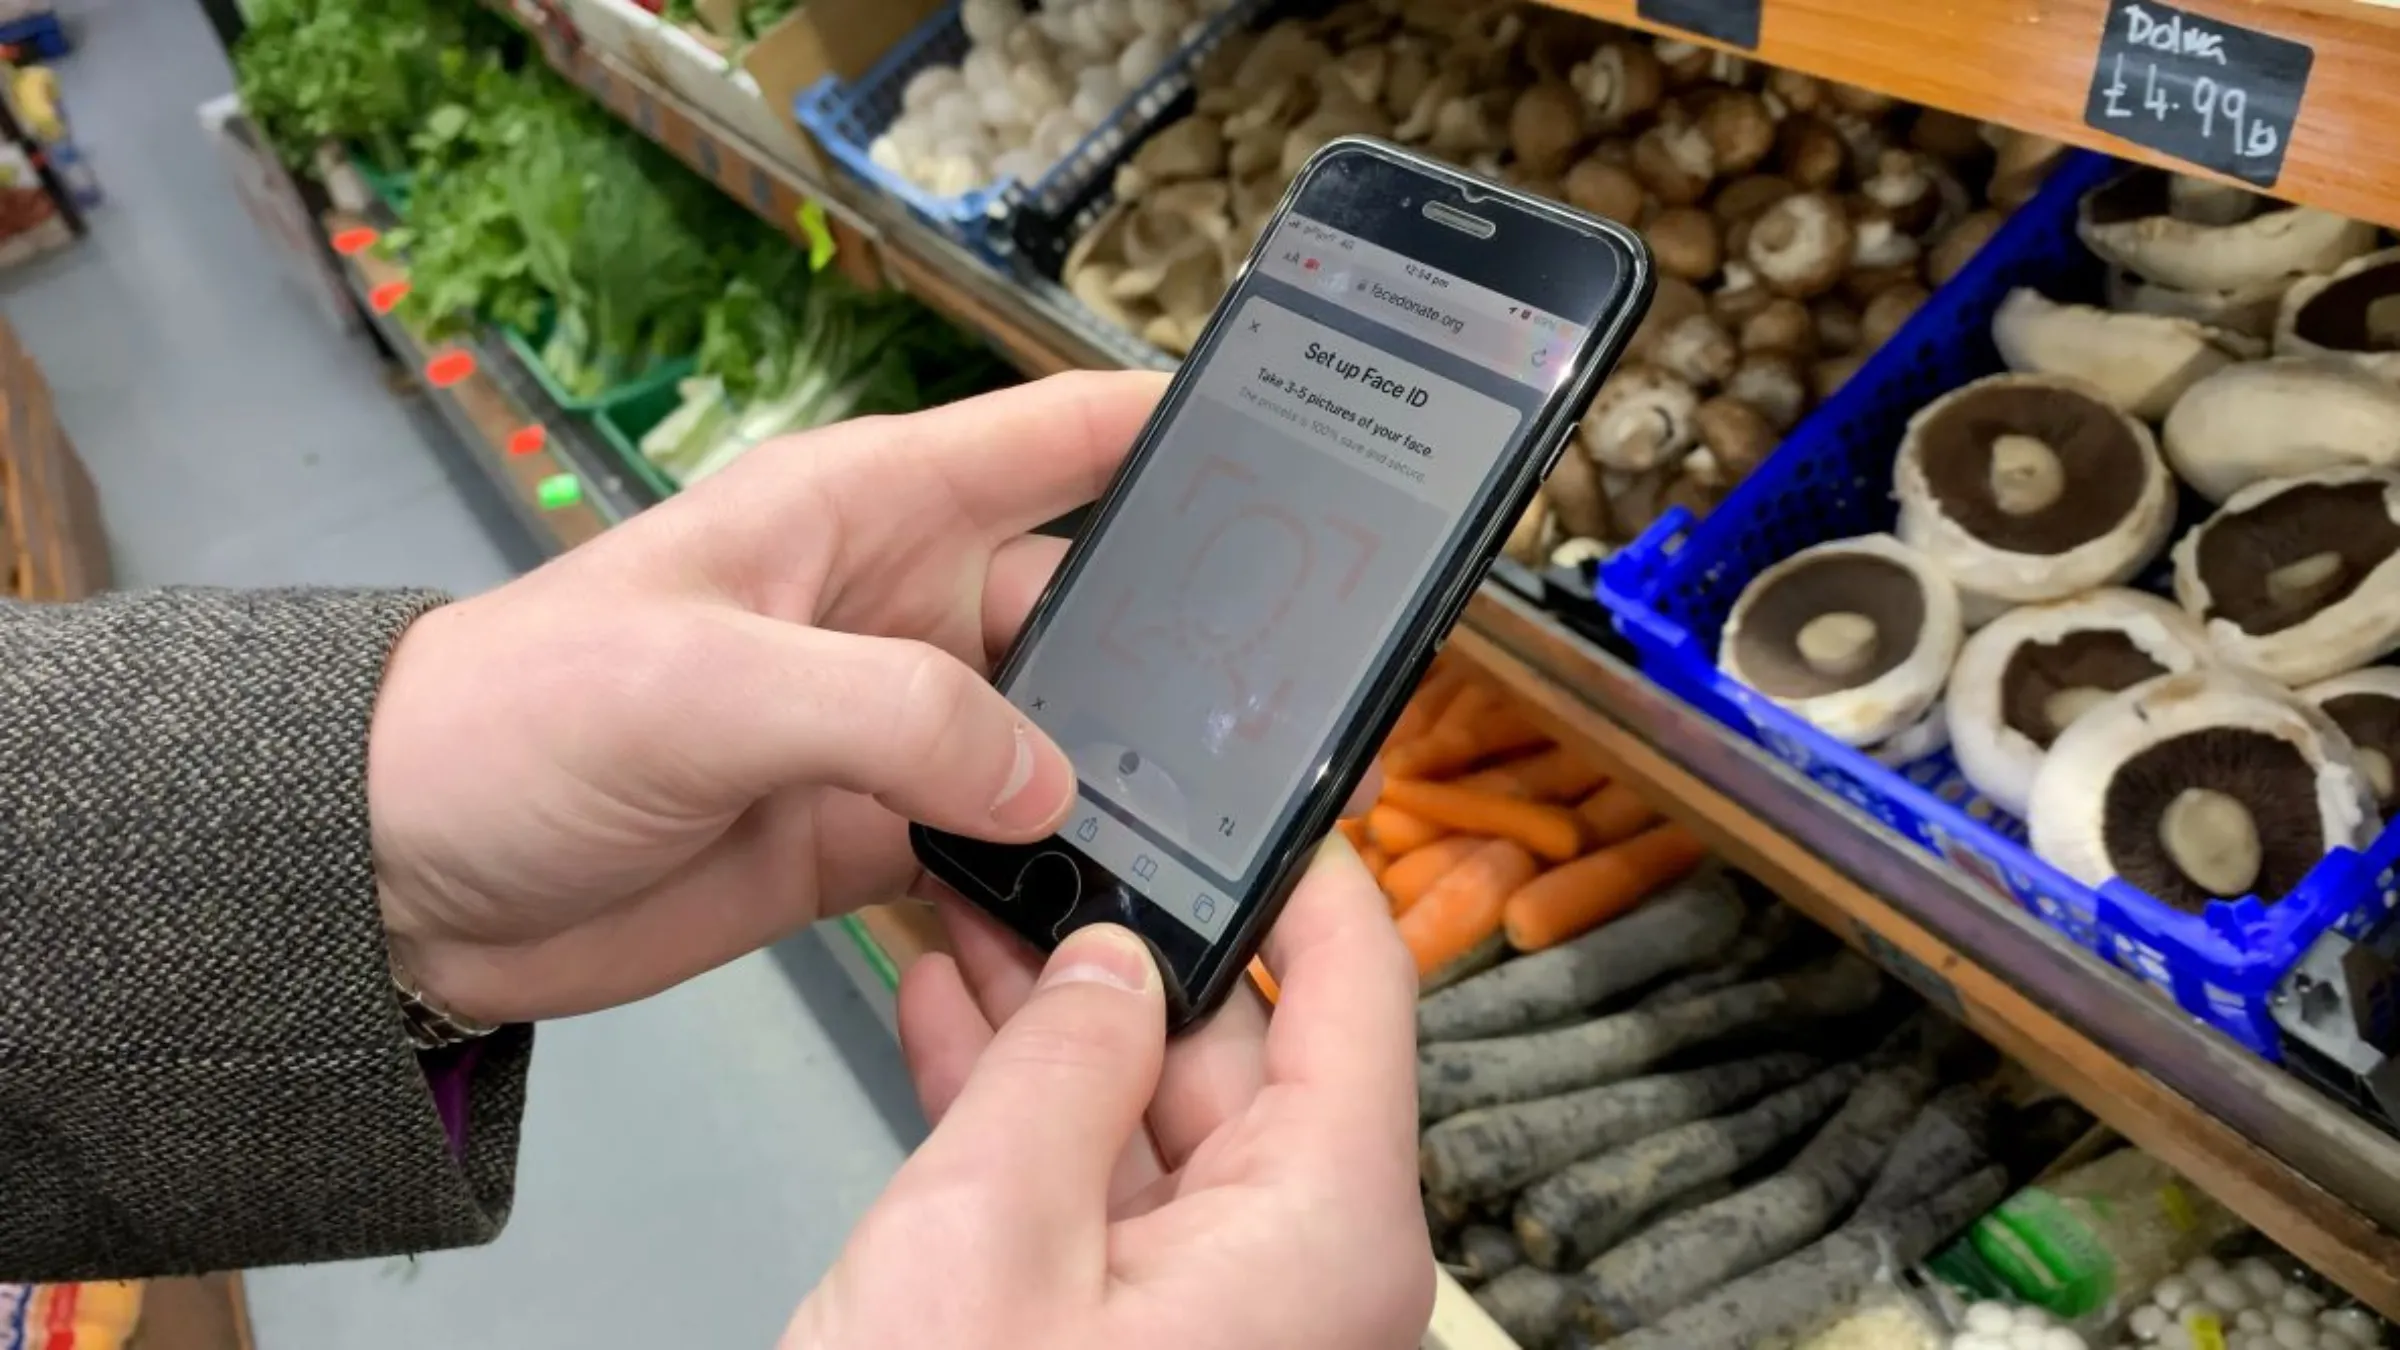 A user in a local grocery store uses FaceDonate, a donations app that lets users receive and pay for essential items with face scans, in east London, Britain on April 24, 2023